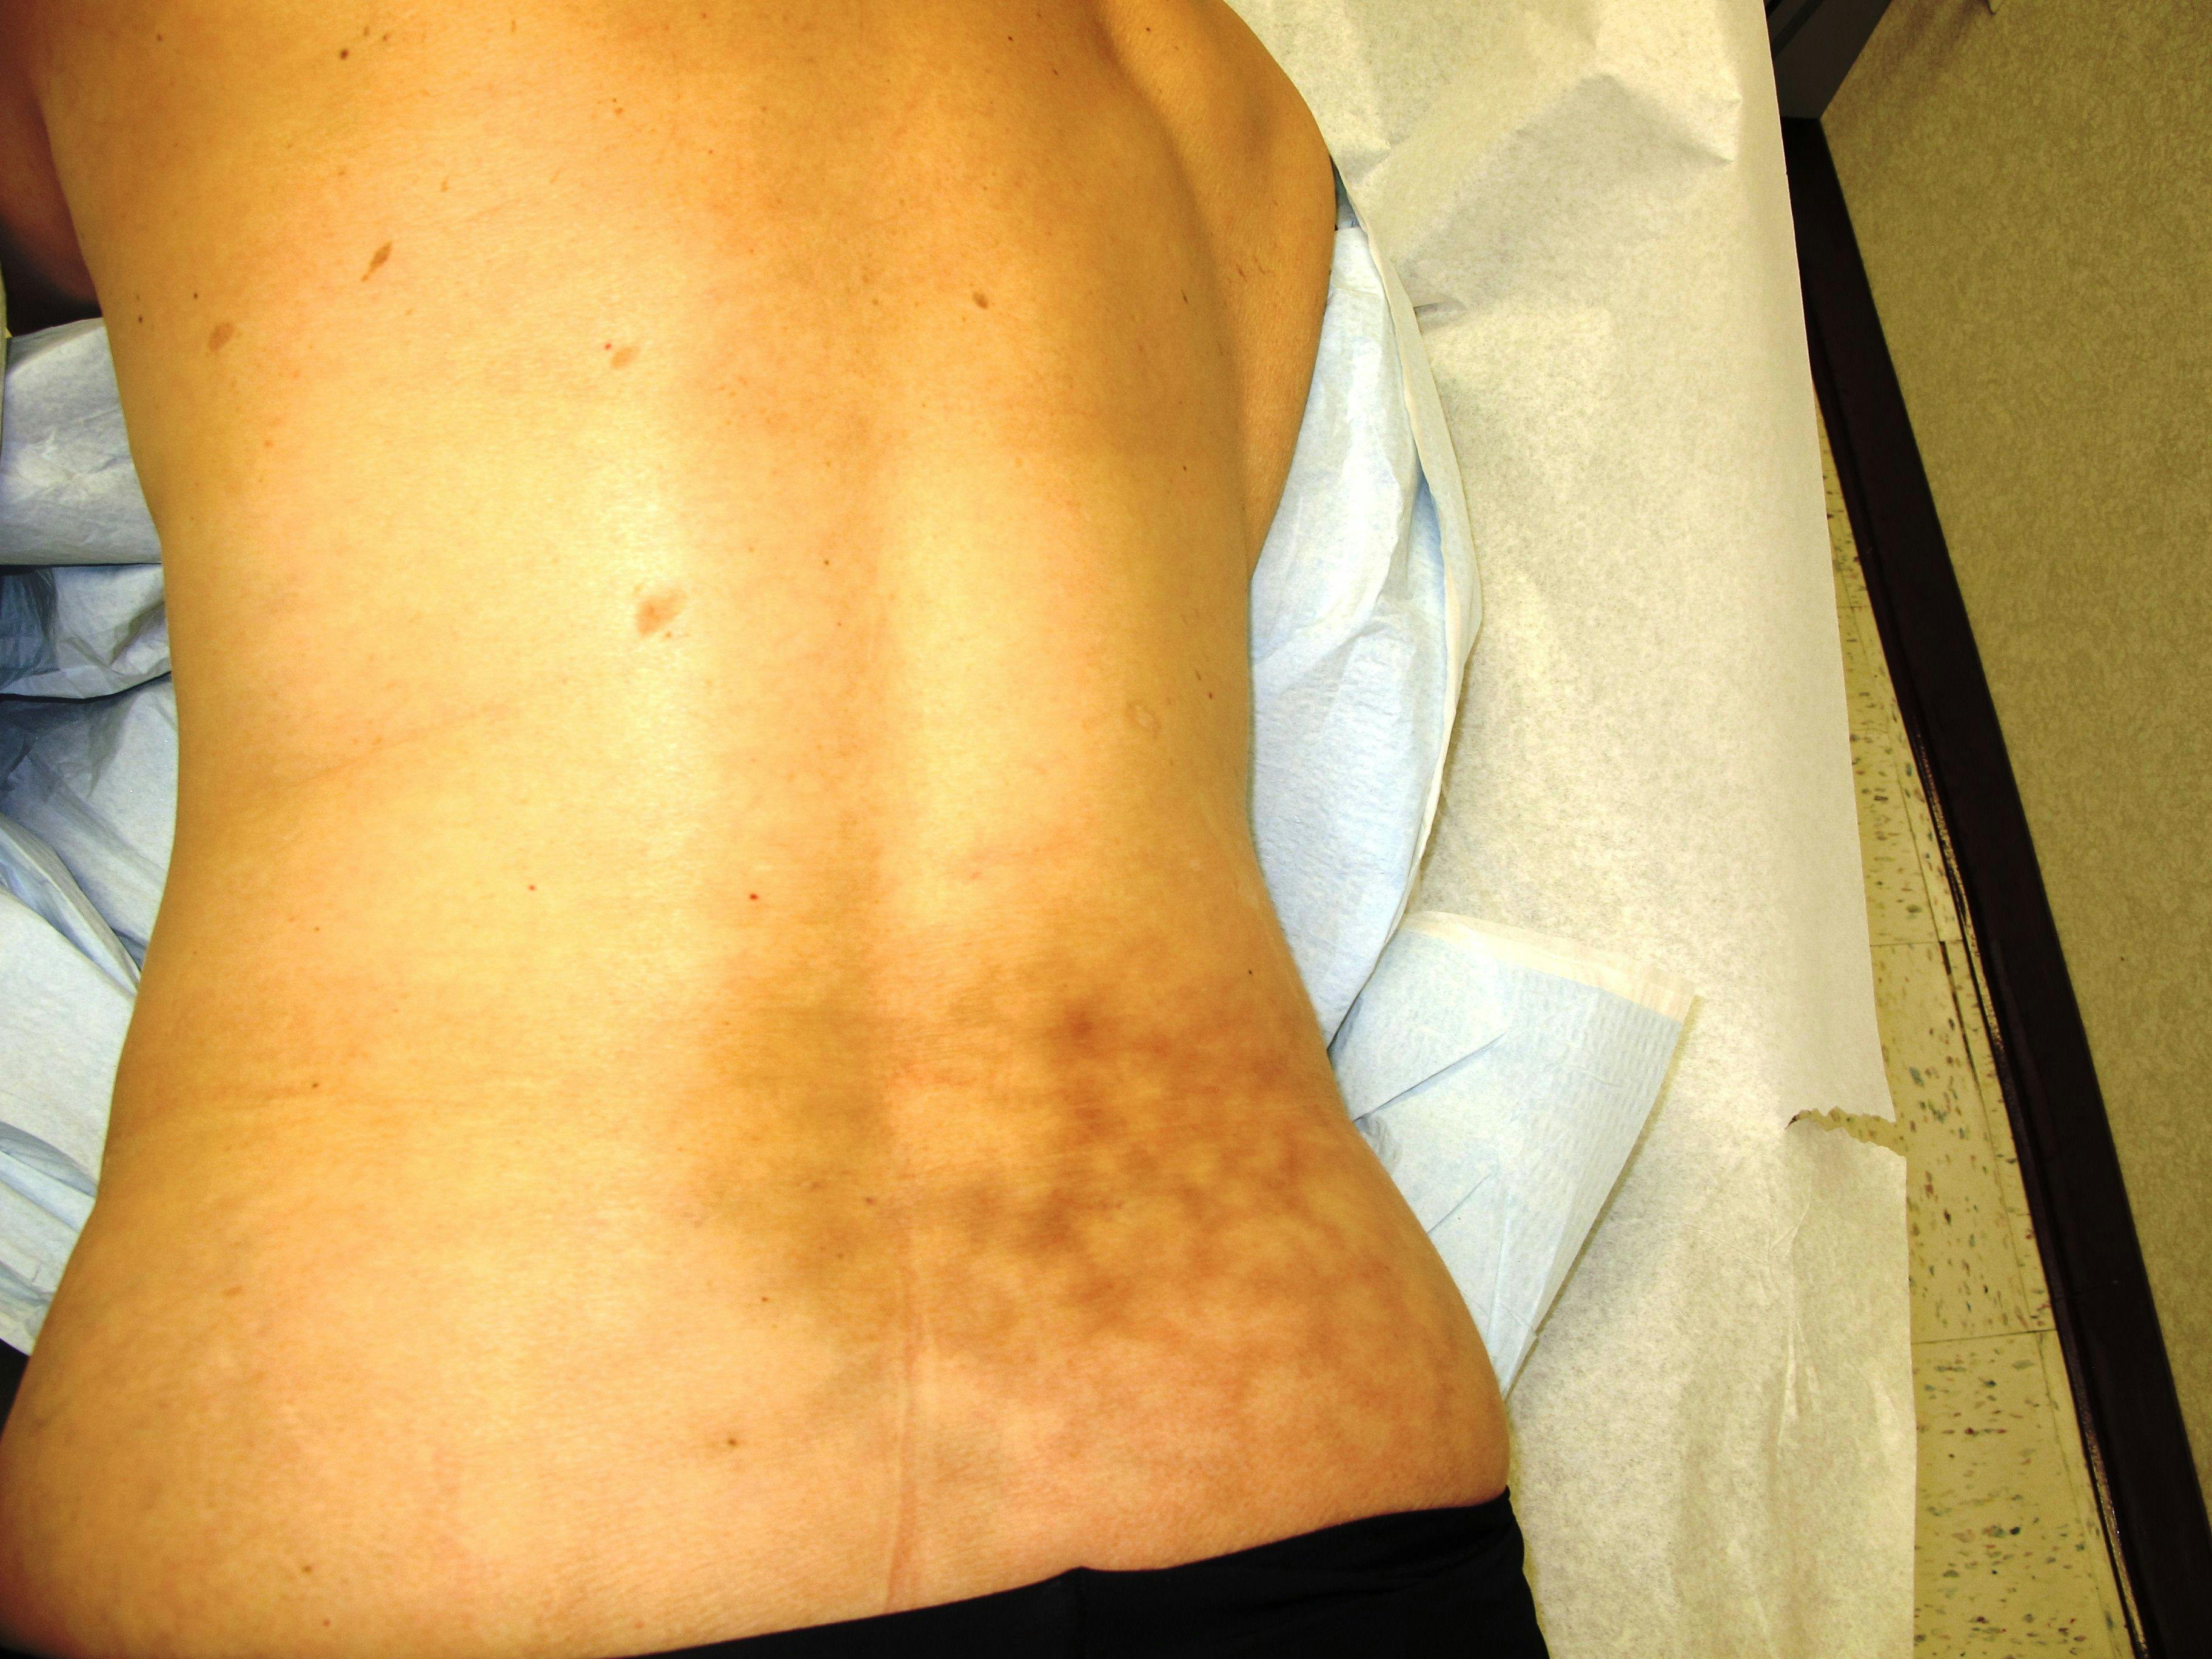 An Asymptomatic Rash on the Low Back of an Older Woman 